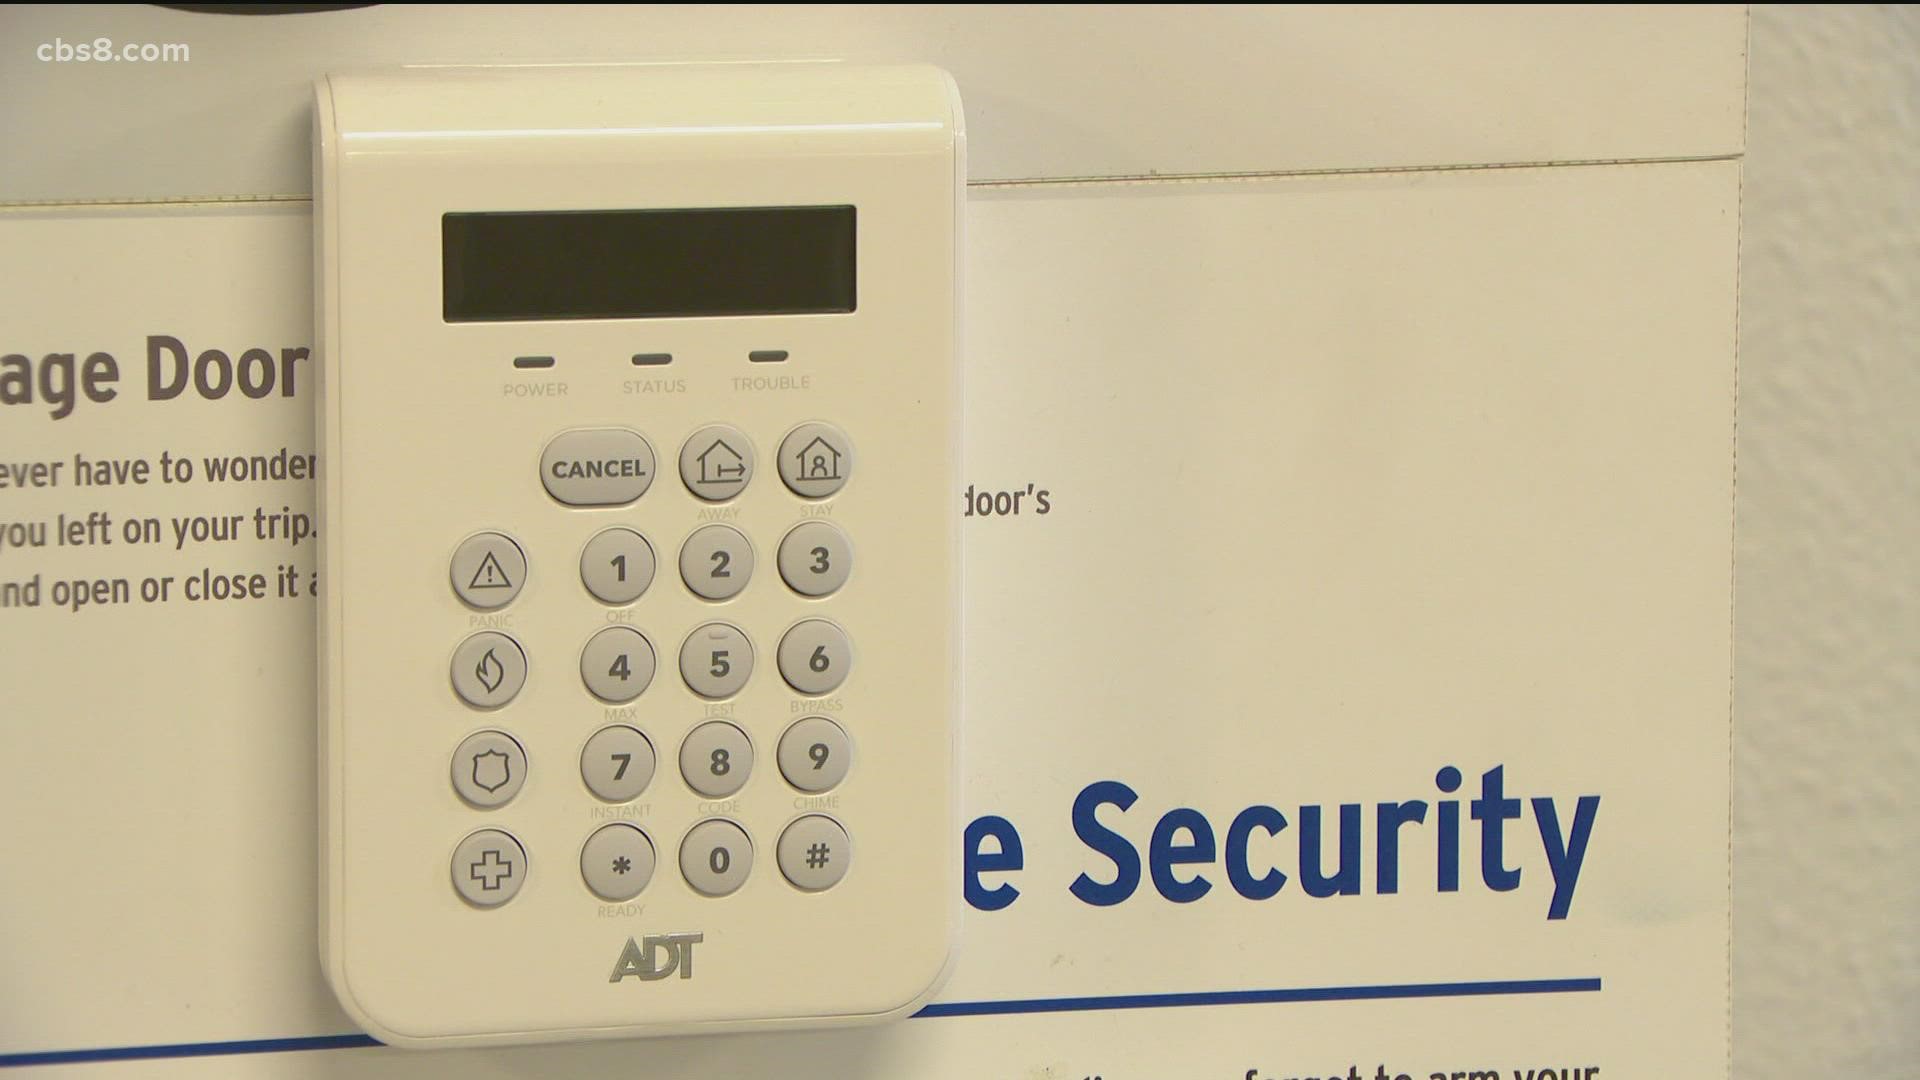 Some San Diego home security companies say their business is on the rise with new customers buying better alarm systems to protect their homes.